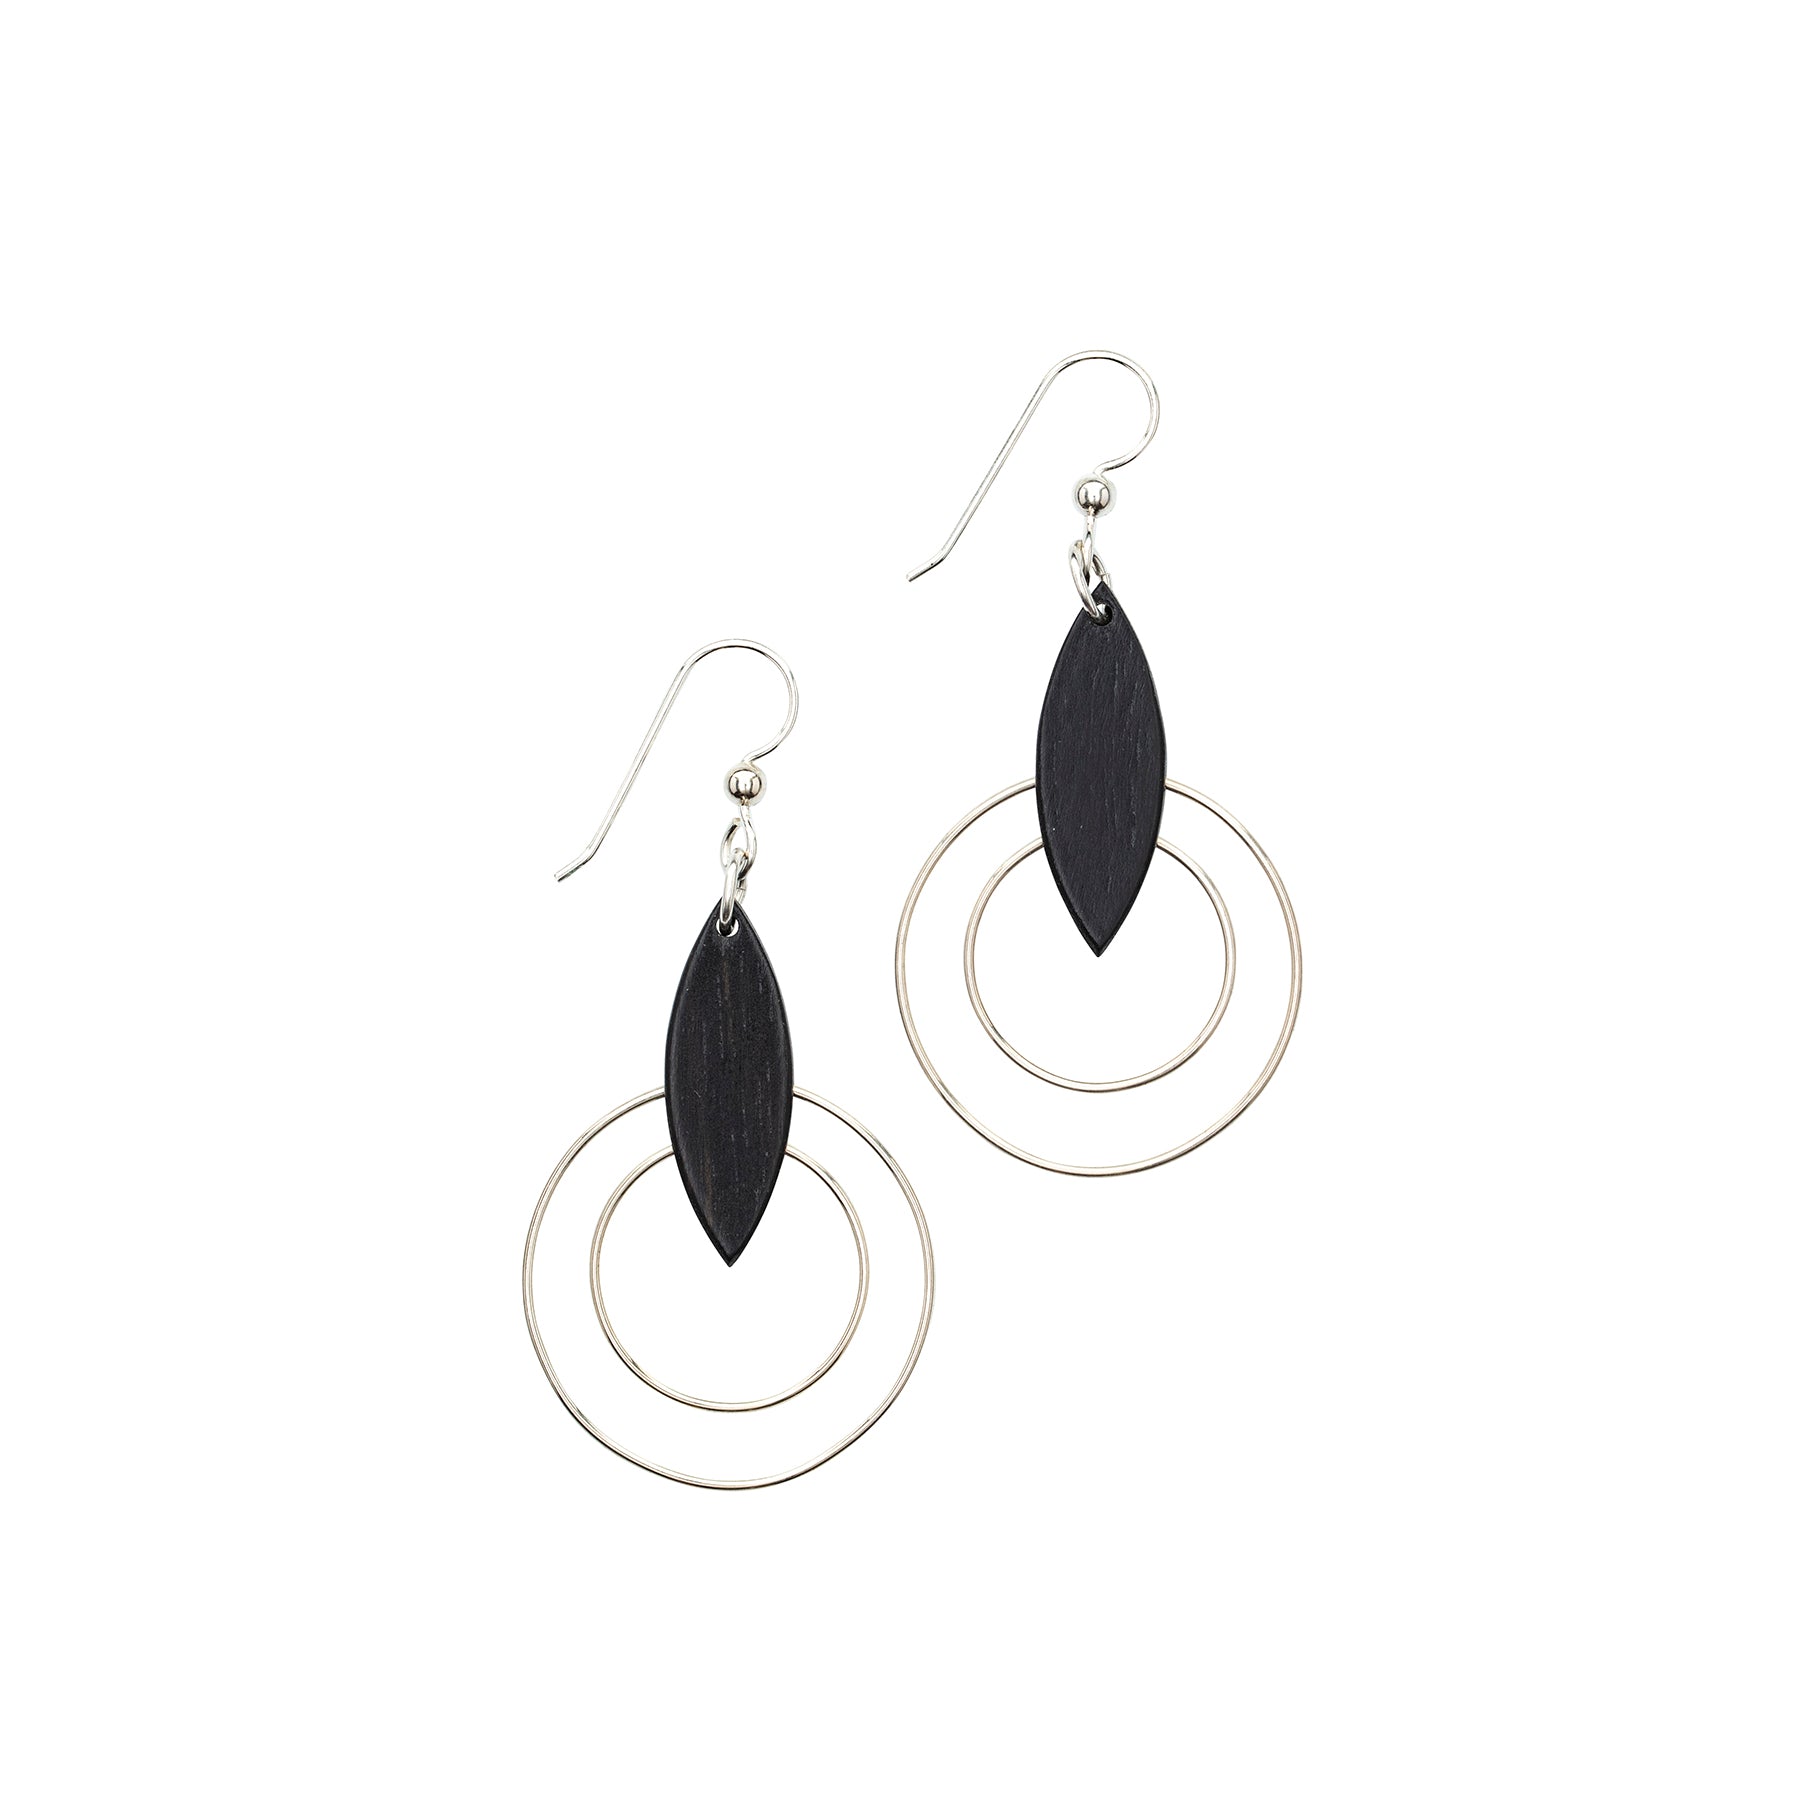 Ebony  and silver double ring earrings